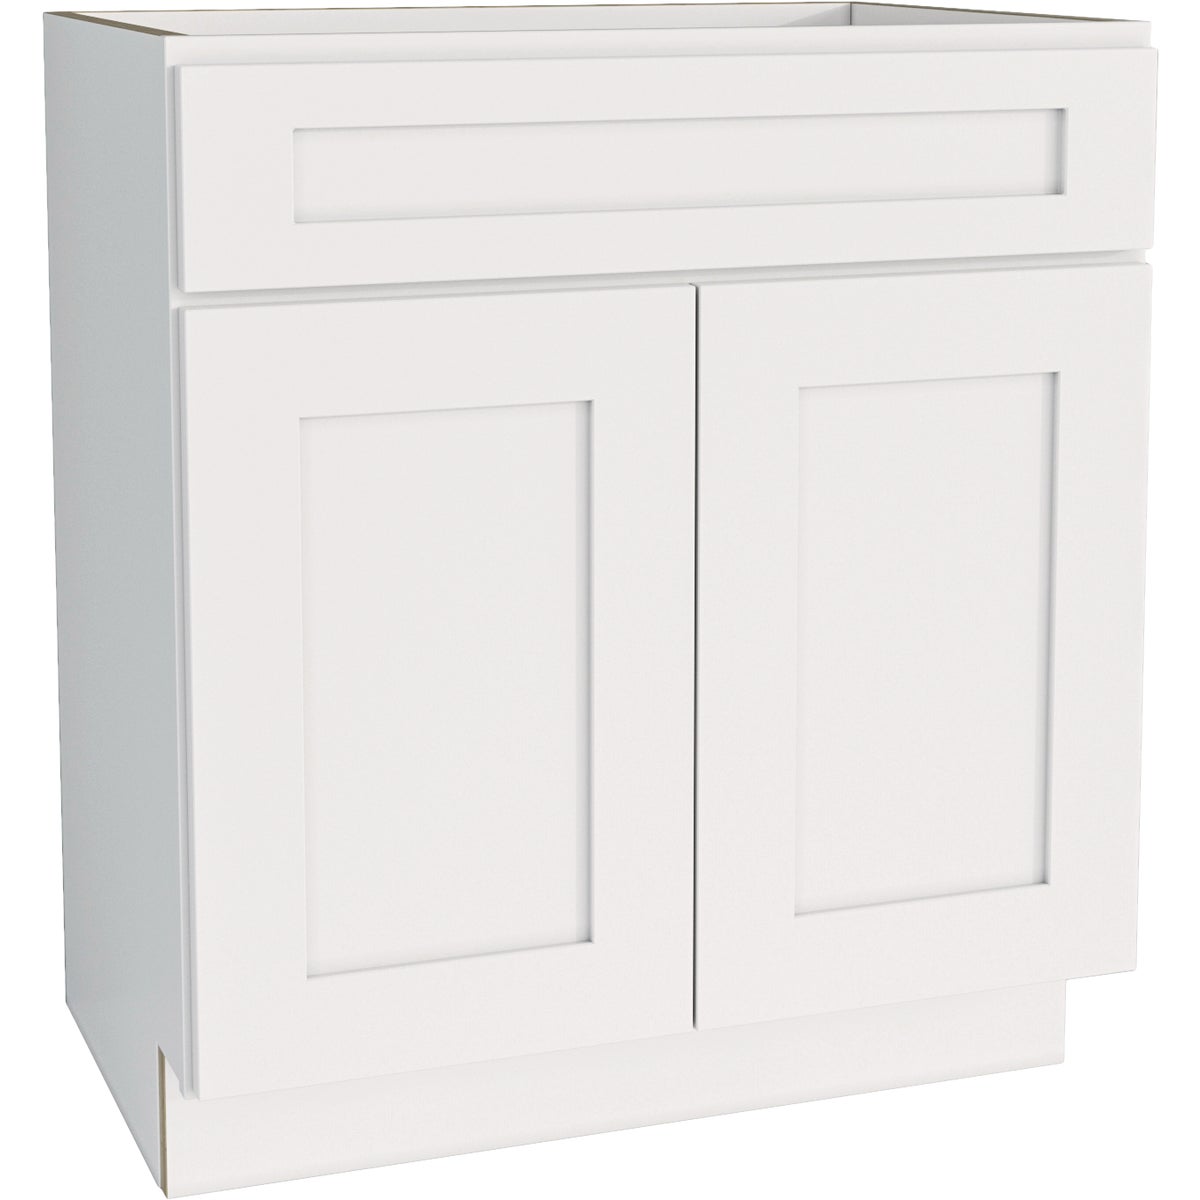 CraftMark Plymouth Shaker 30 In. W x 24 In. D x 34.5 In. H Ready To Assemble White Sink Base Kitchen Cabinet